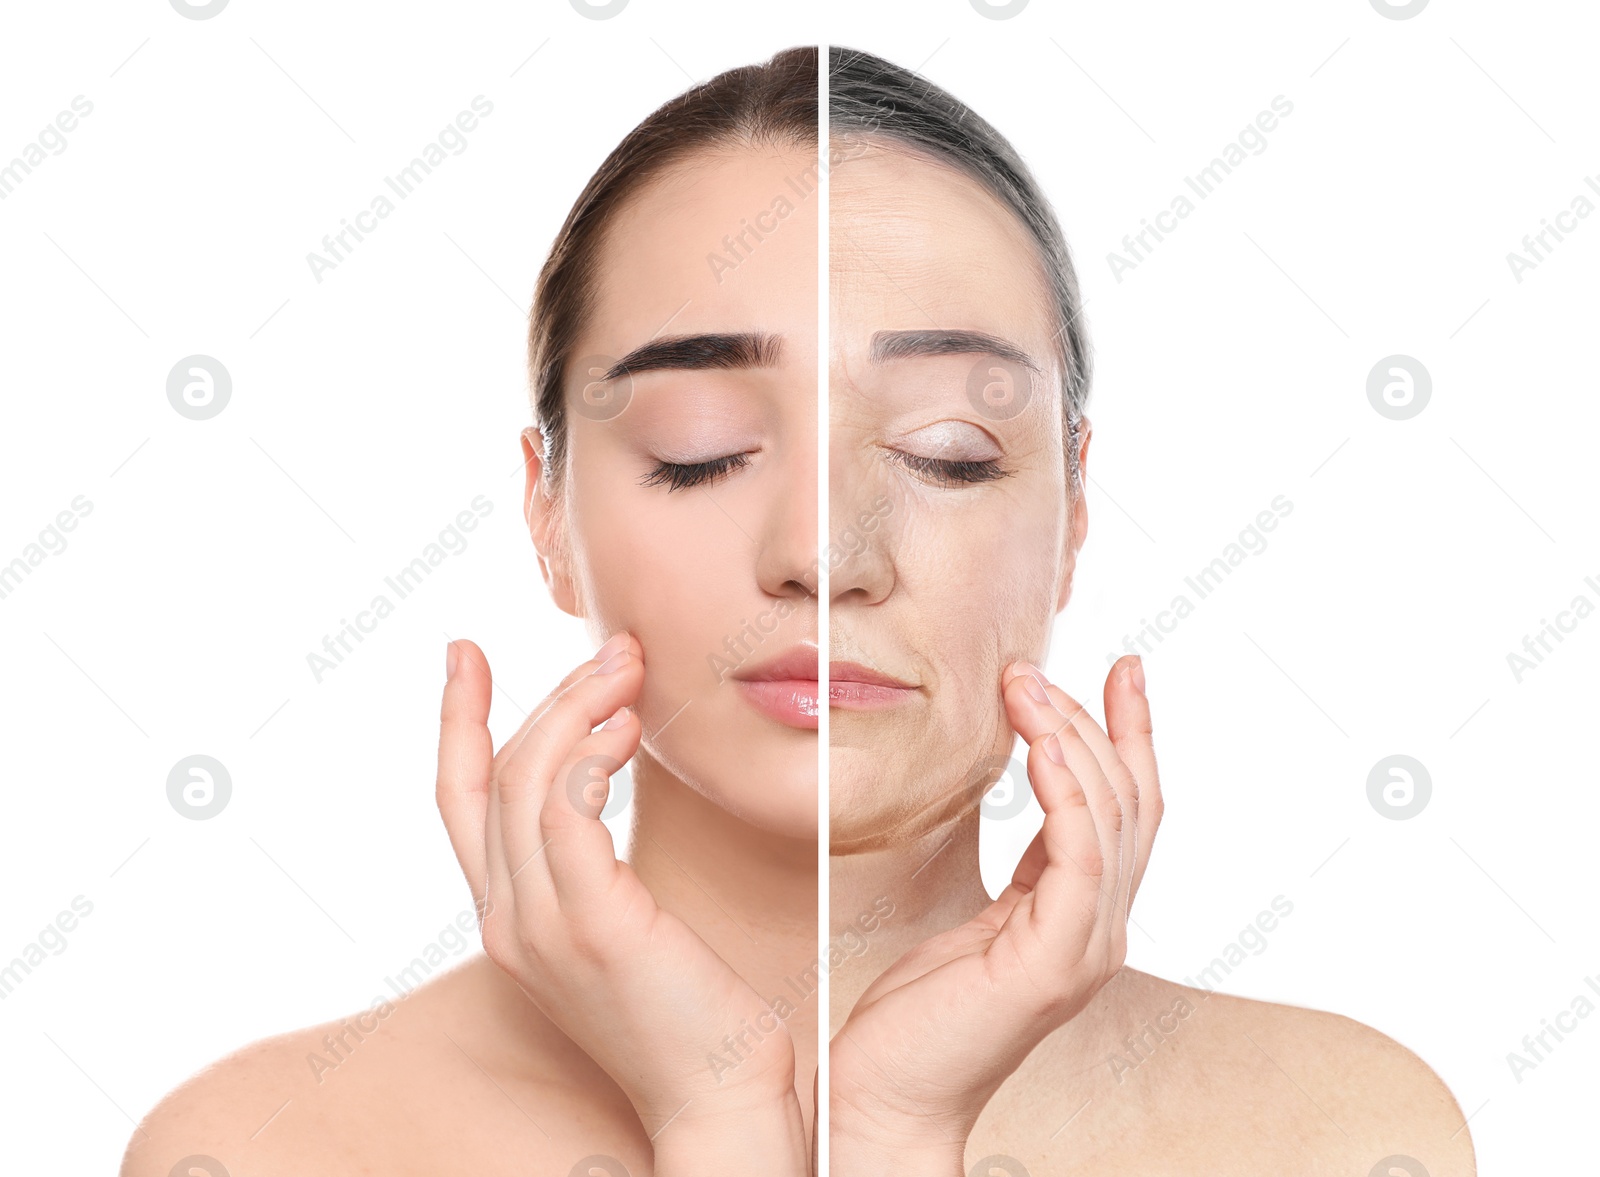 Image of Changes in appearance during aging. Portrait of woman divided in half to show her in younger and older ages. Collage design on white background